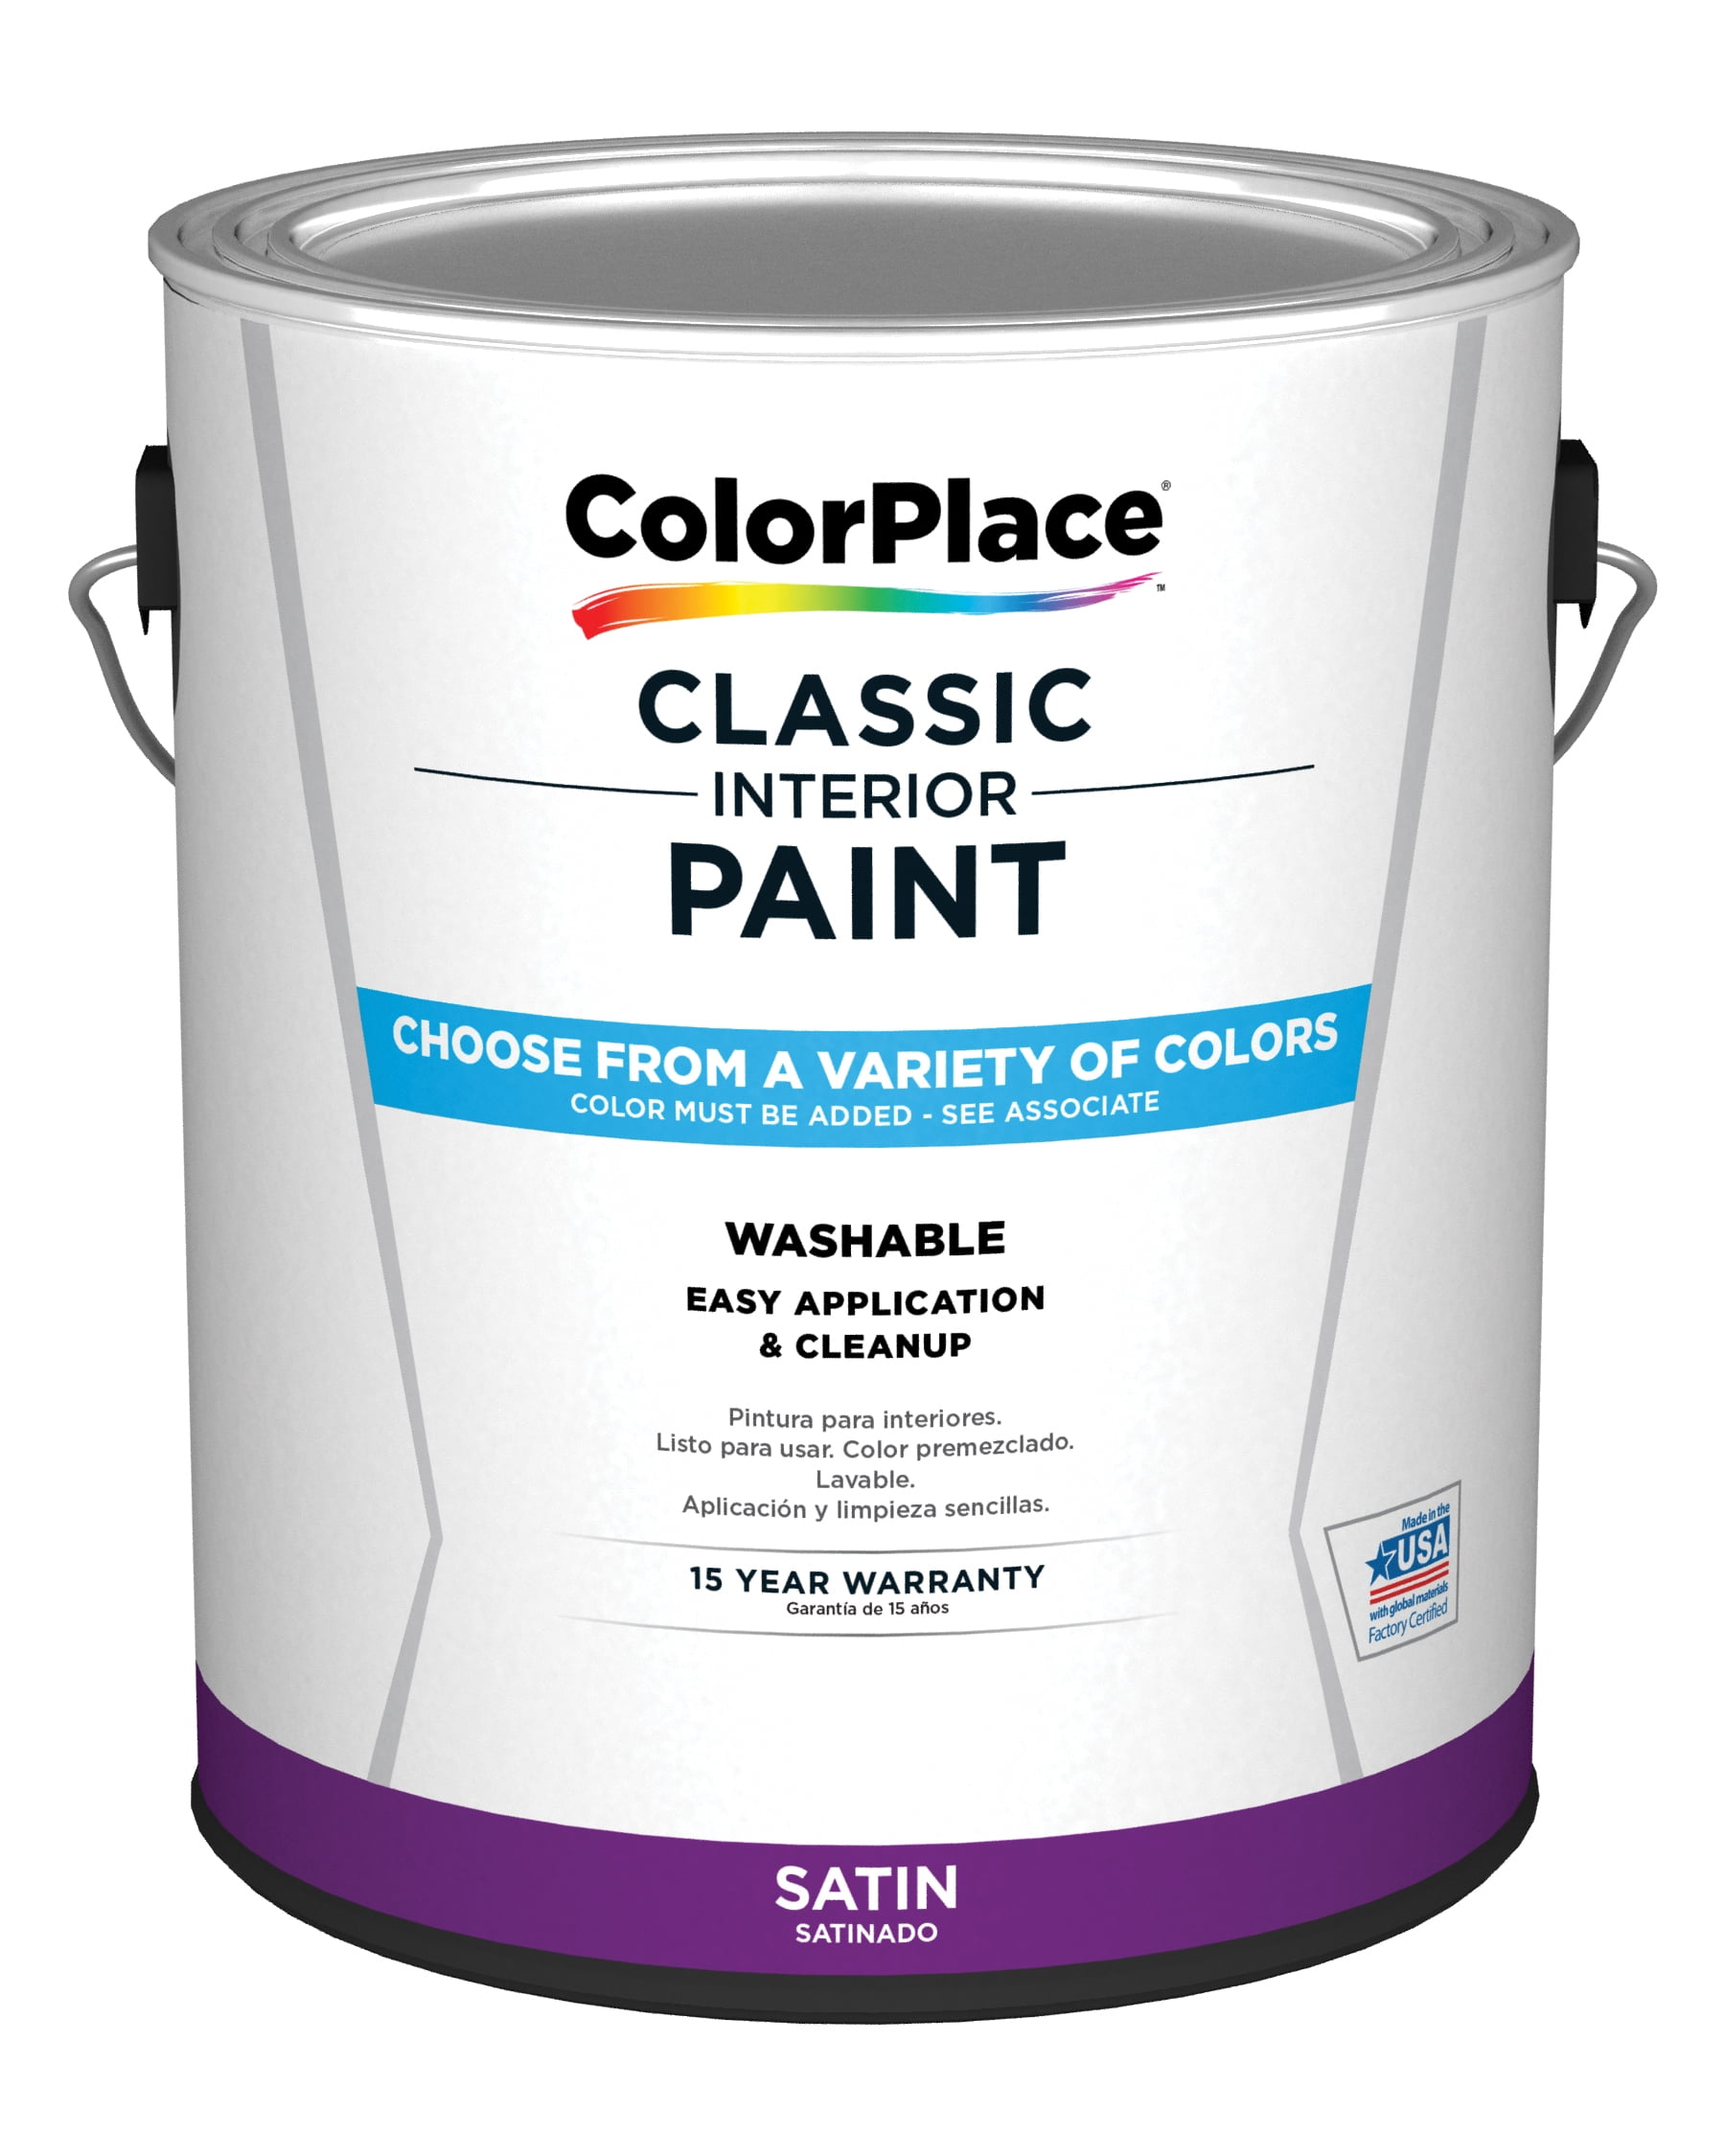 ColorPlace Classic Interior Wall Trim Paint, Satin, Accent